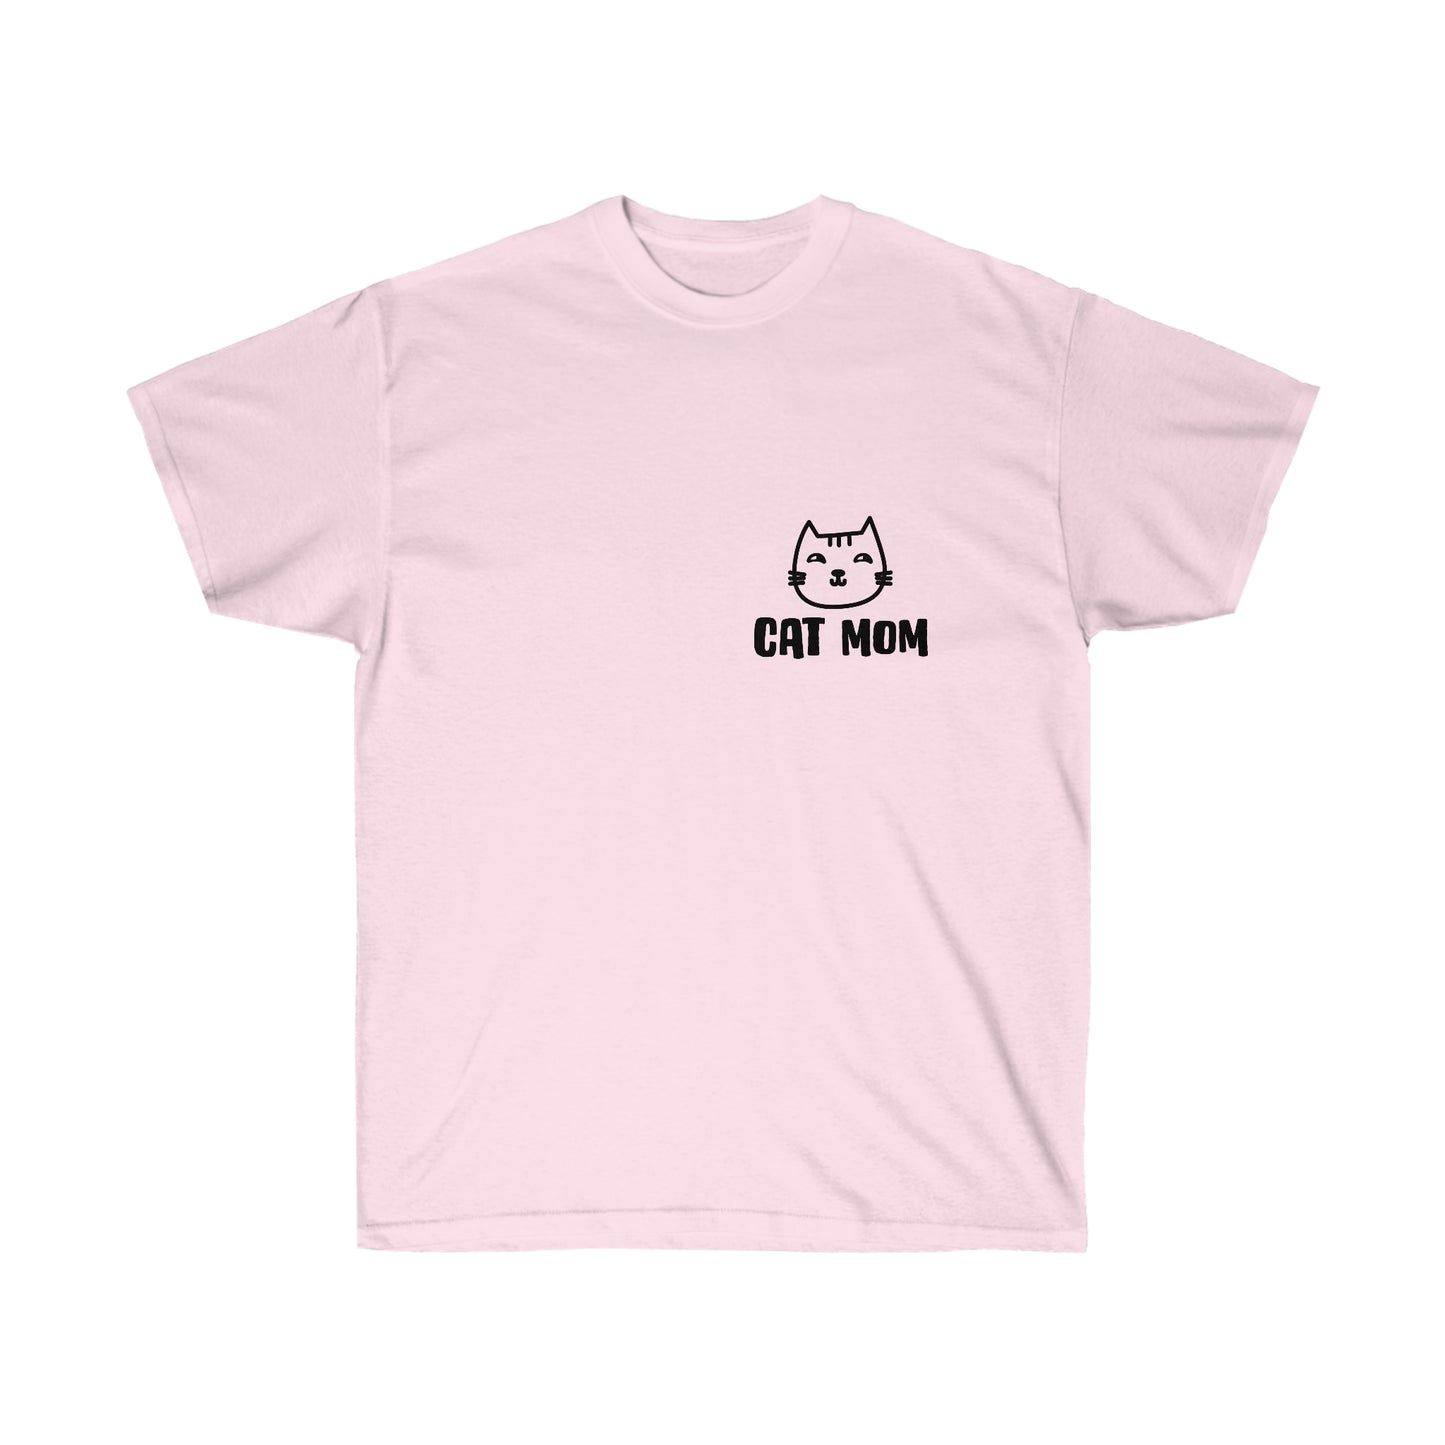 Cat Mom T-Shirt - Cute and Stylish Tee for Cat Lovers - Gift for Cat Moms